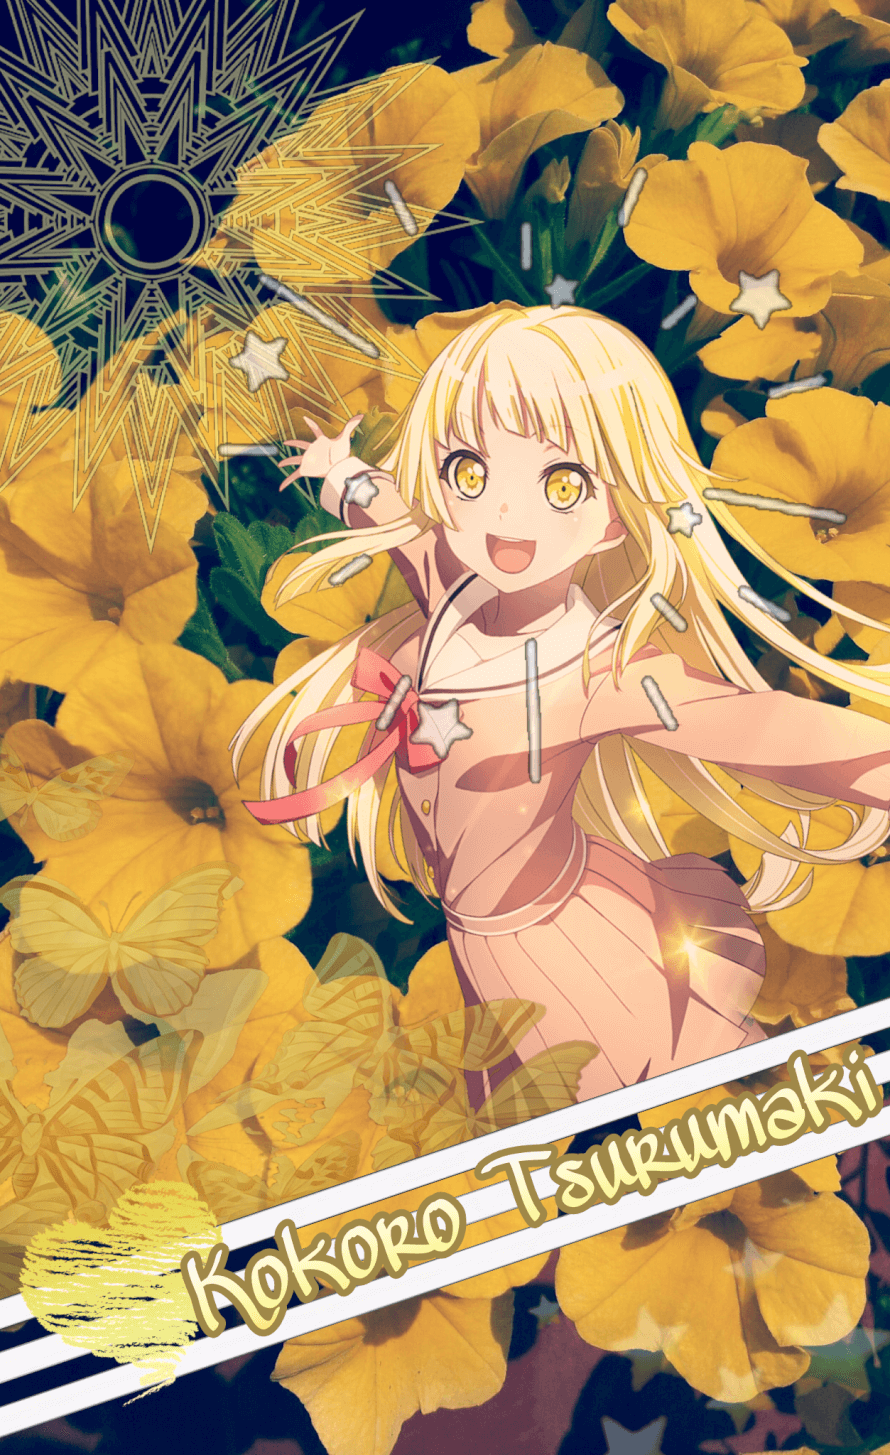 Here I am back at it again with them wallpaper edits!
I made one for Kokoro and my arm really hurts...